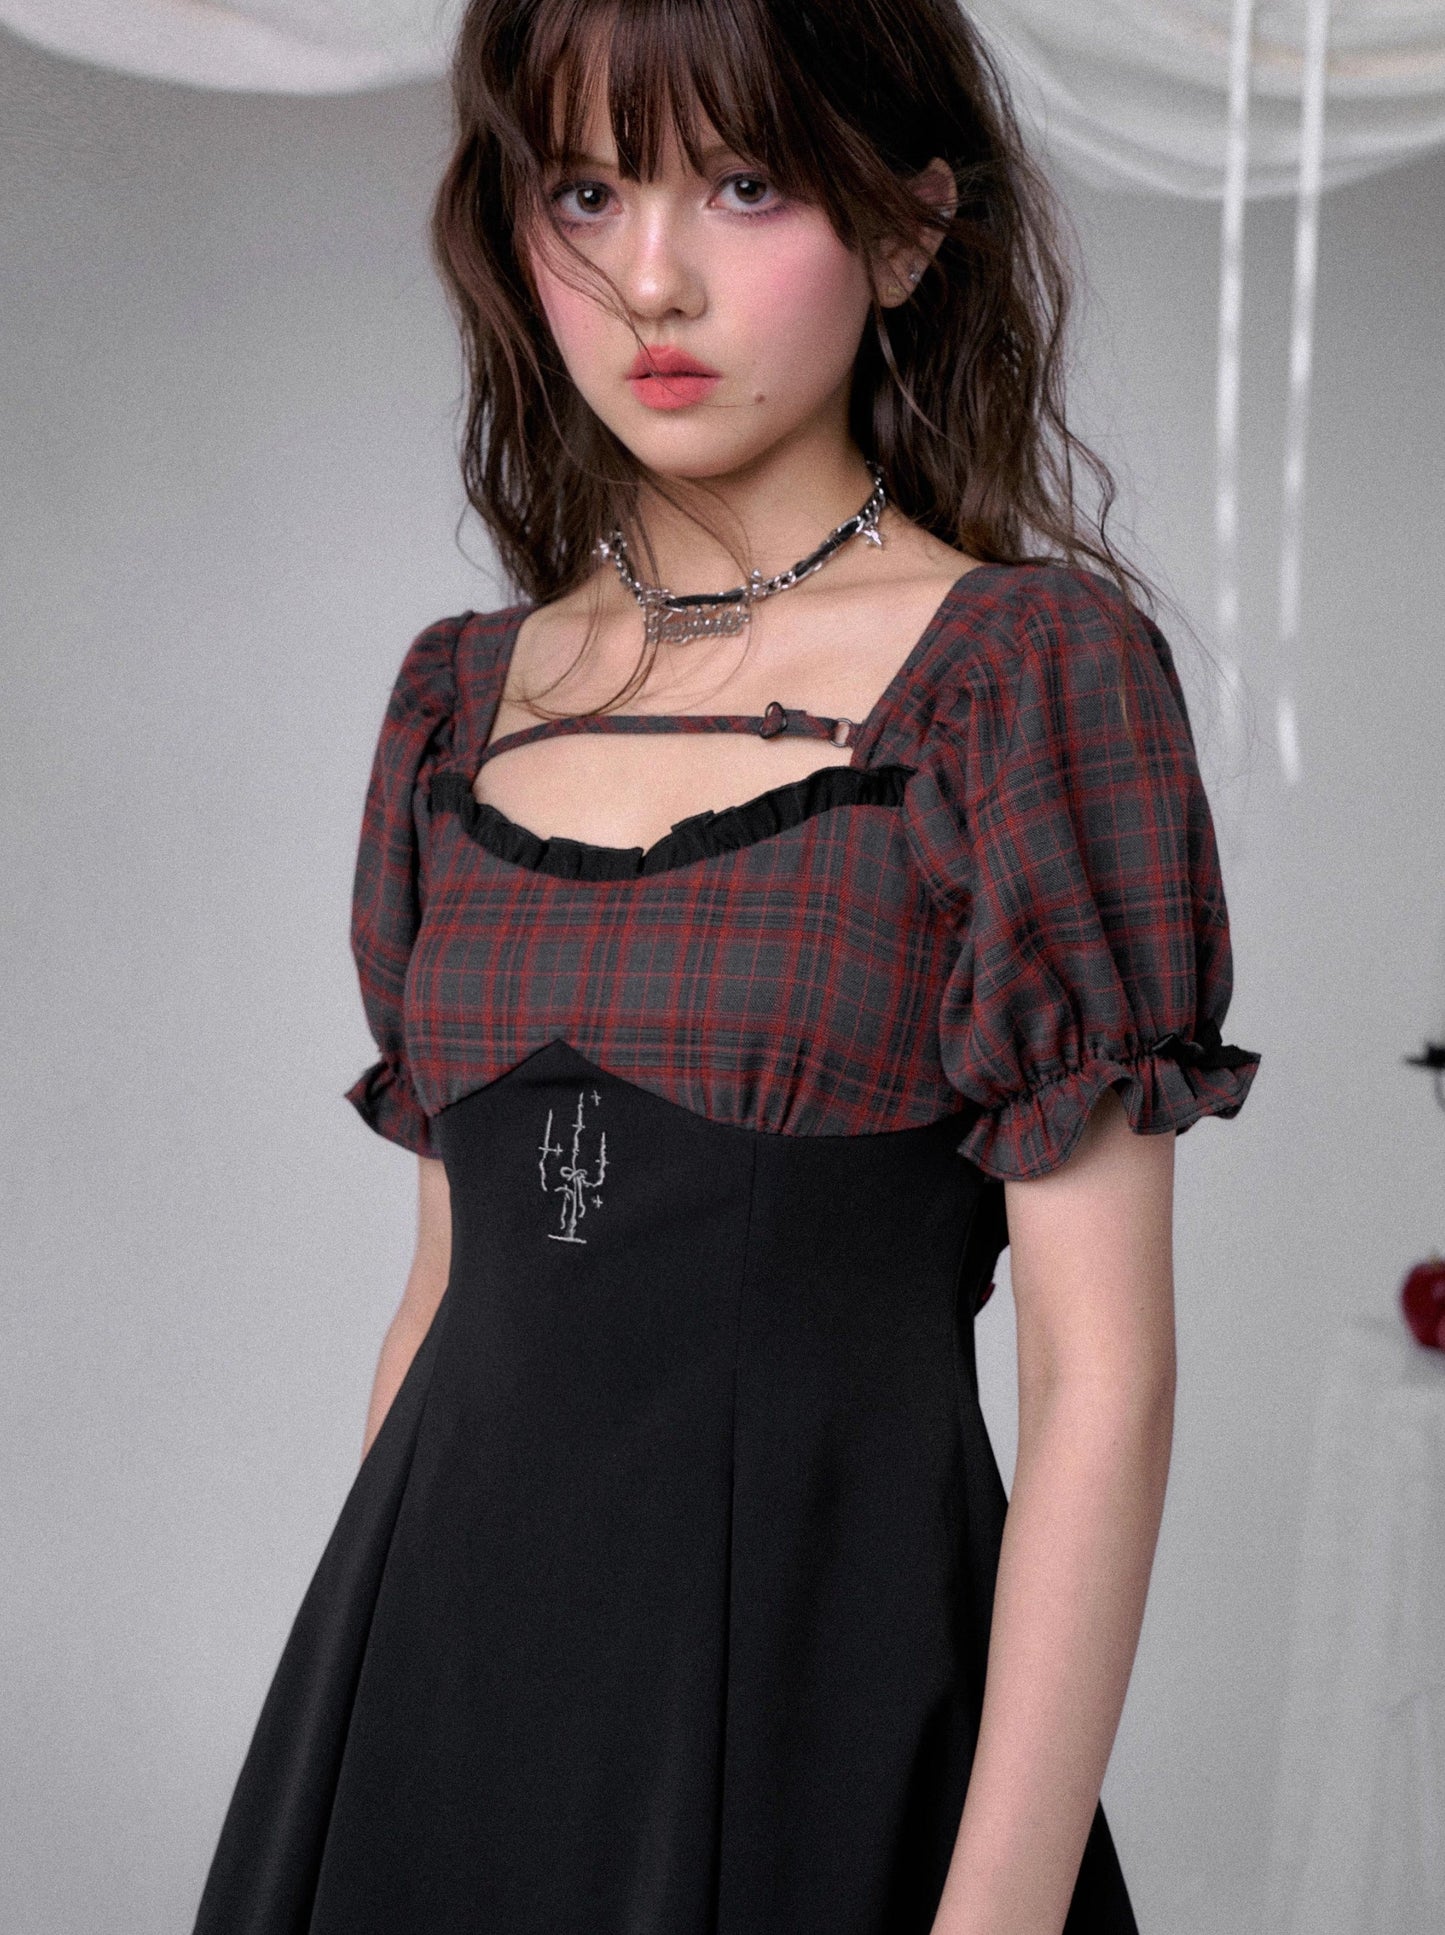 SagiDolls Girly Fighting Spirit #RedFlavour #Black Red Puff Sleeve Candelabra Embroidered Backless Dress